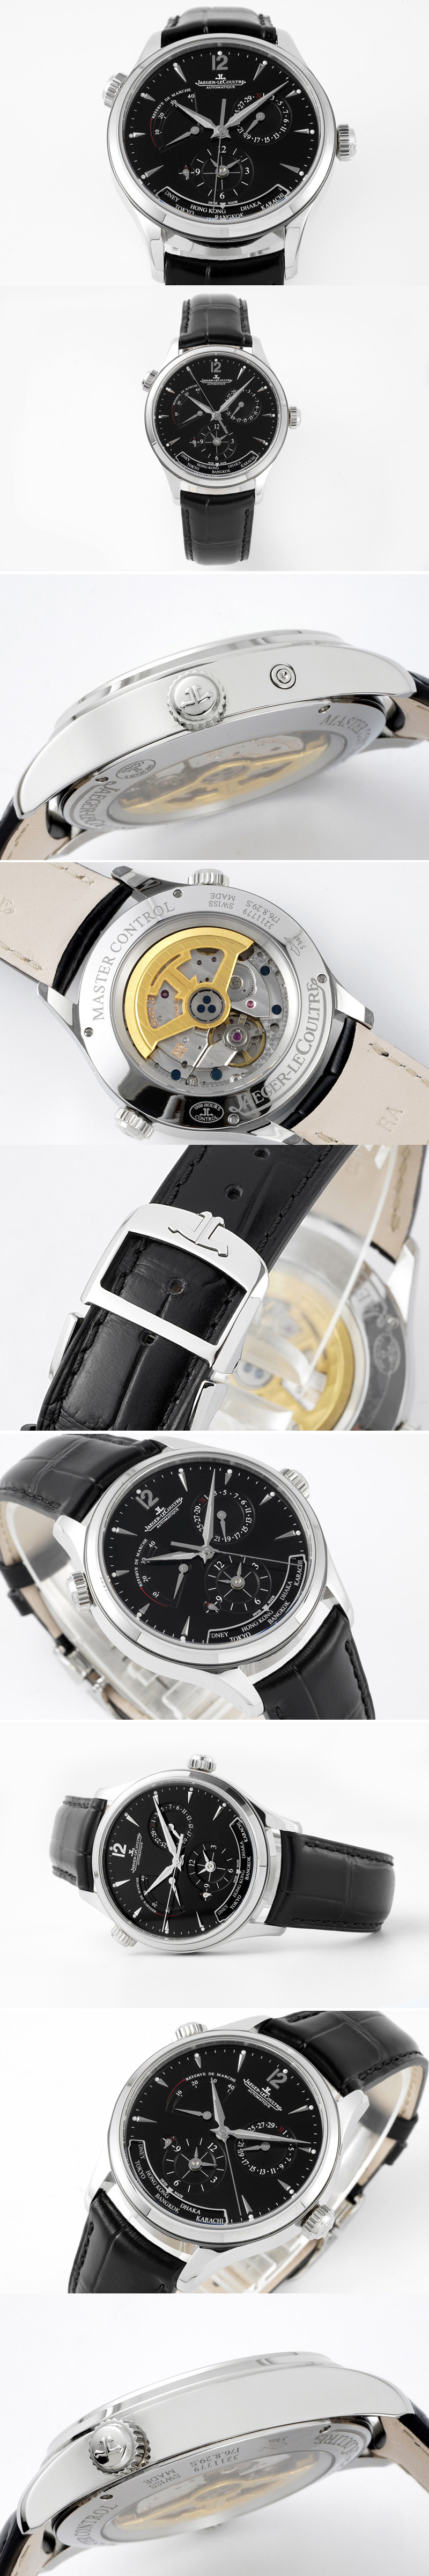 Replica Jaeger-LeCoultre Master Geographic Real PR SS ZF 1:1 Best Edition Black Dial on Black Leather Strap A939